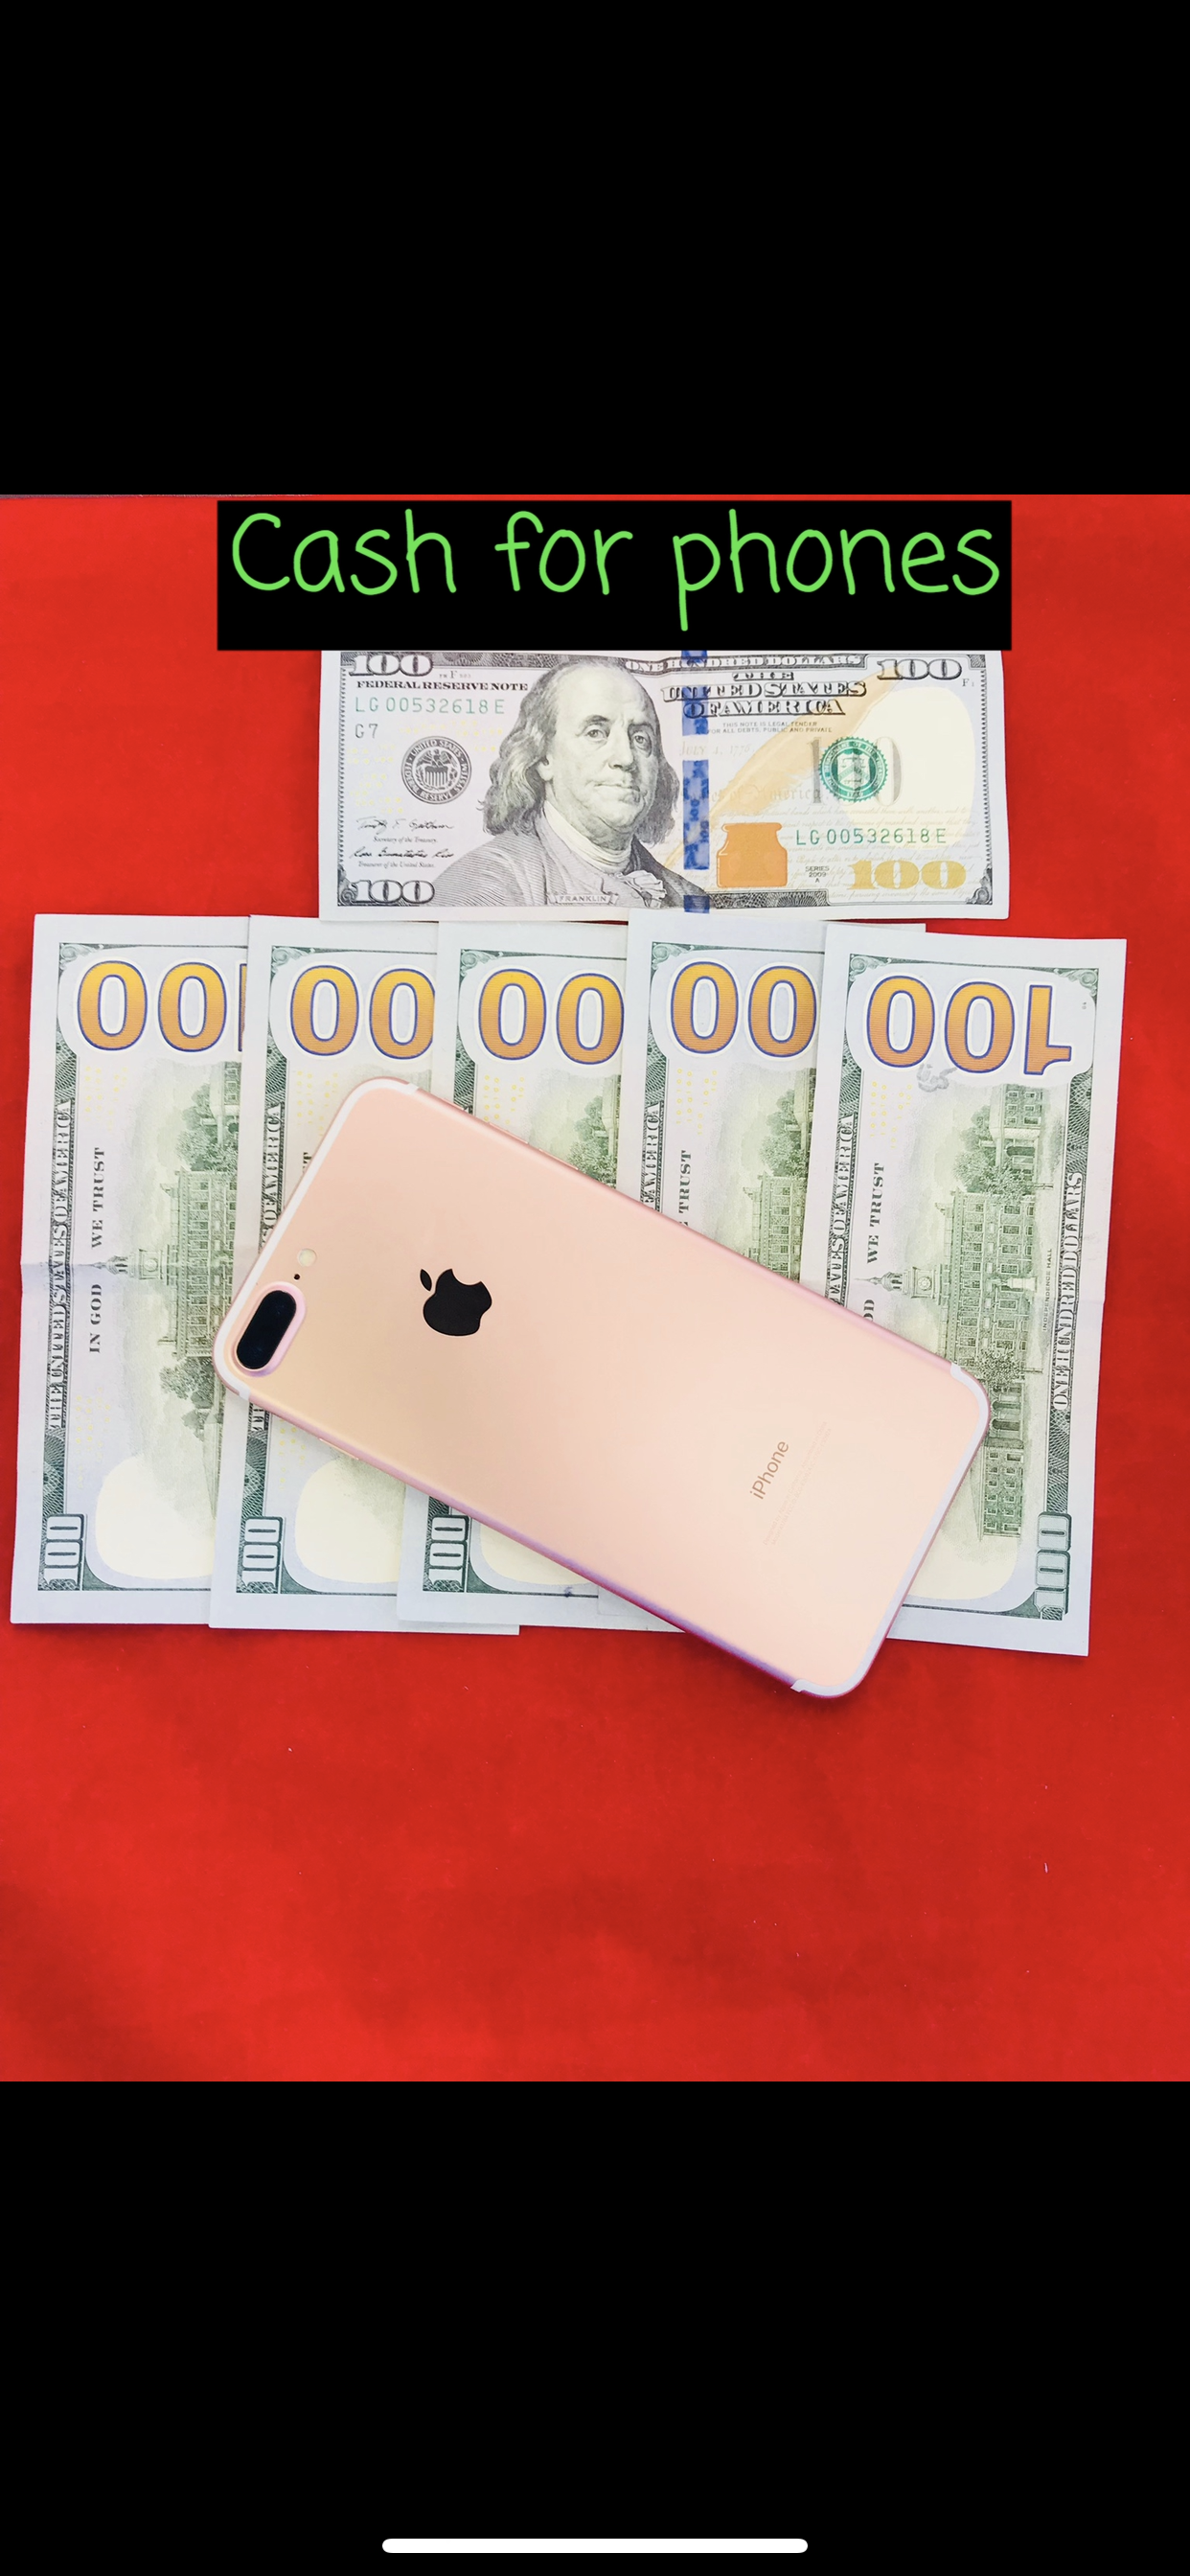 The iPhone 12 is here : Sell your iPhone for Cash today and get the iPhone 12 !